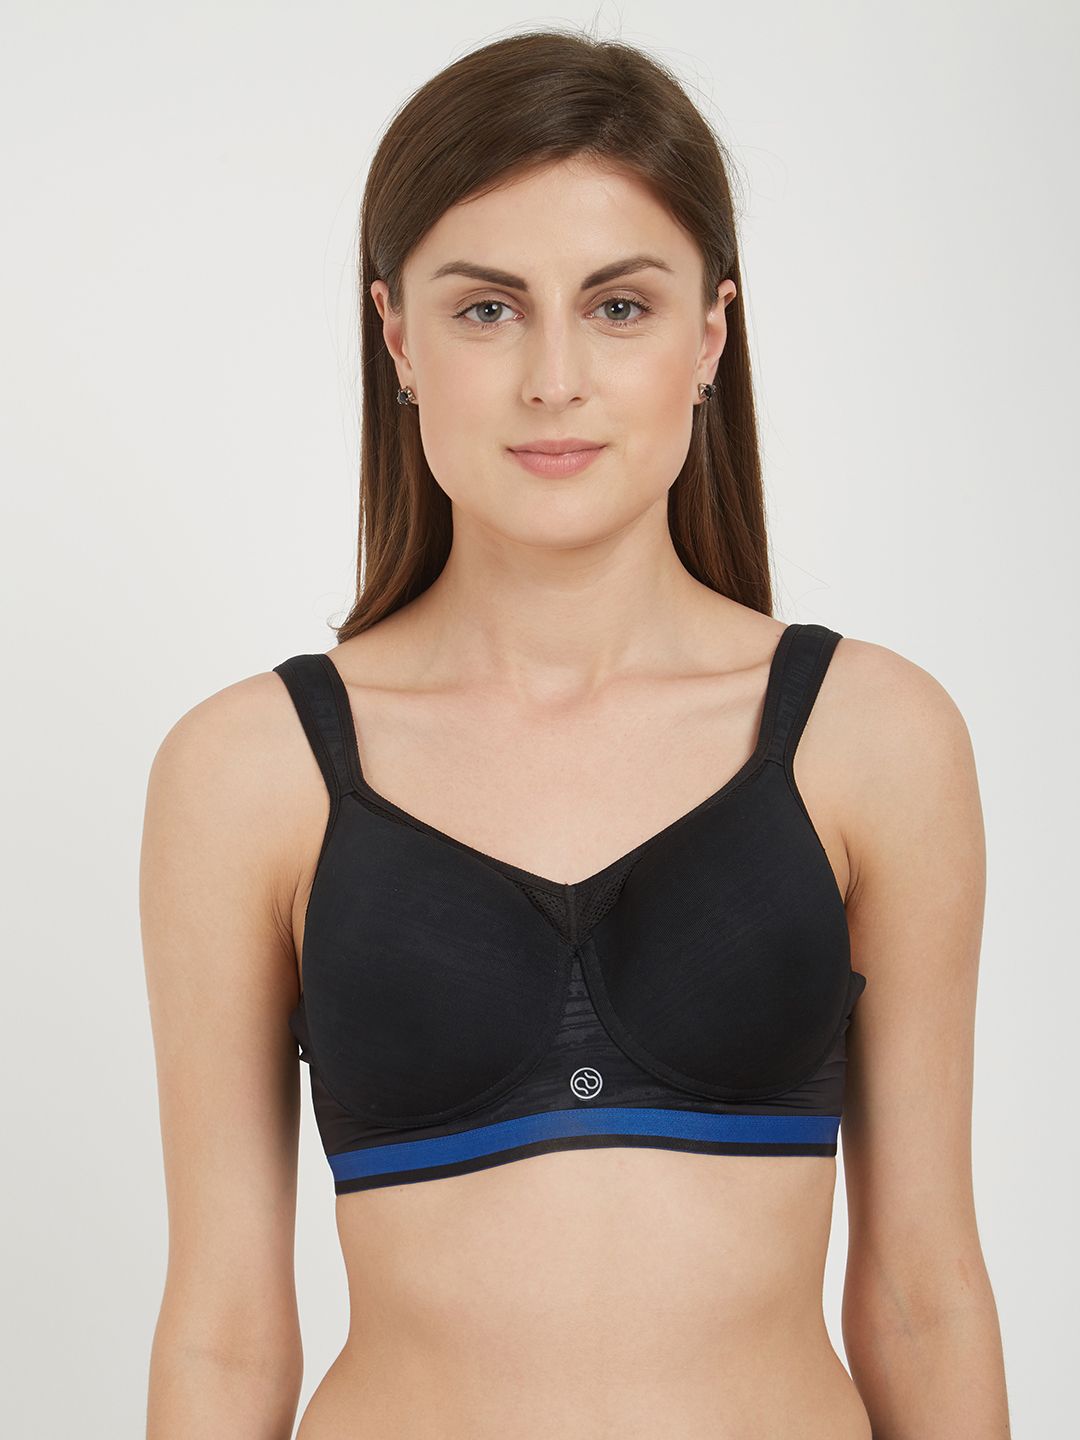 Soie Black Solid Non-Wired Lightly Padded Natural Fabric High Impact Sports Bra Price in India